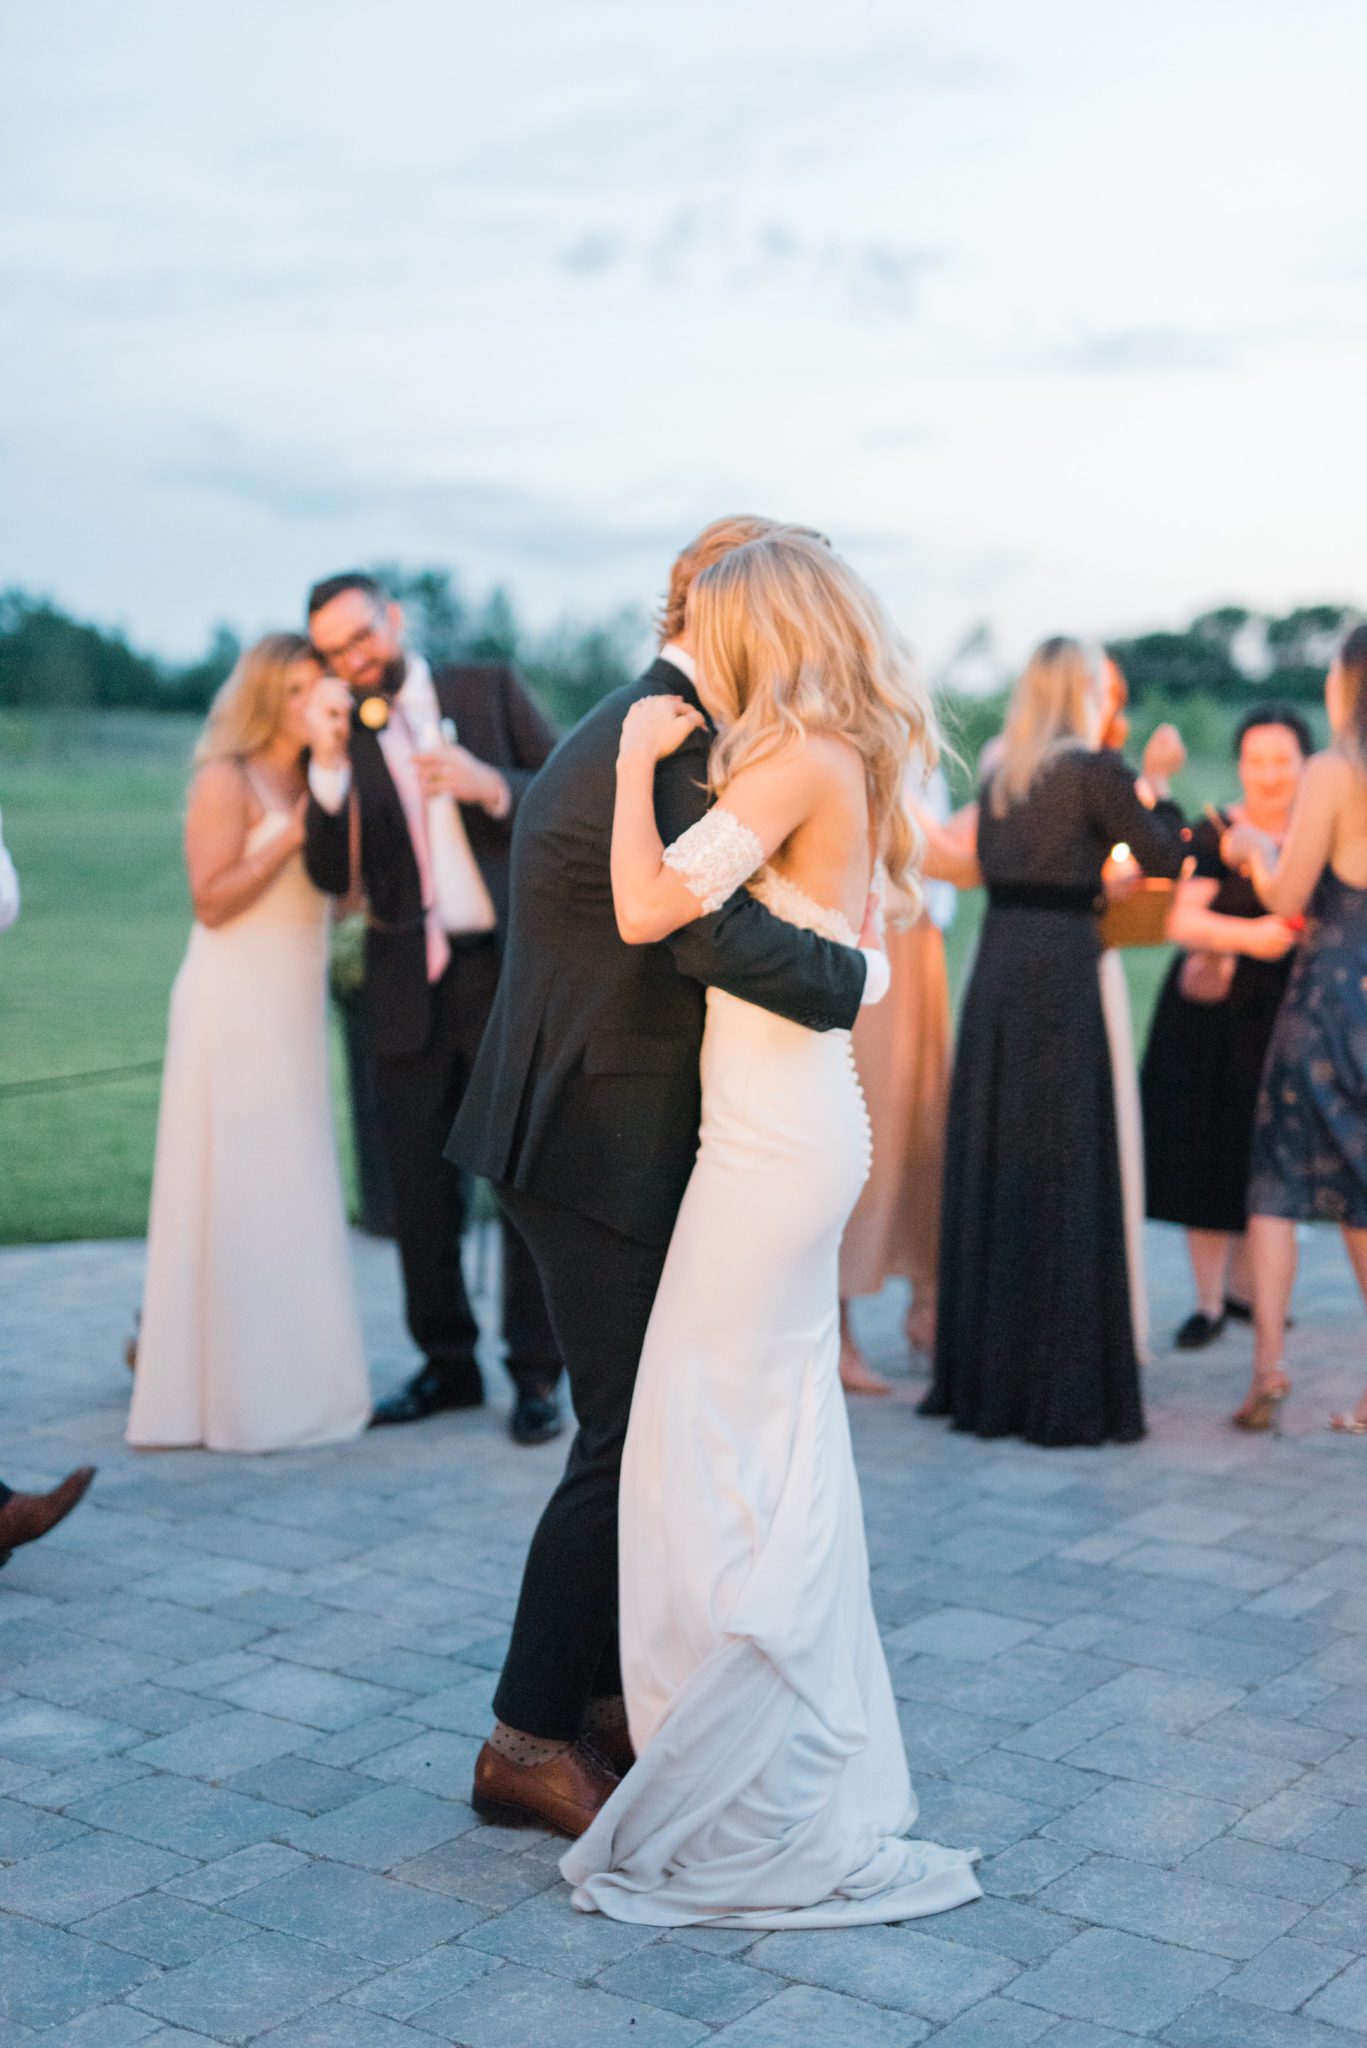 Outdoor first dance at The Barn at Wind's Edge